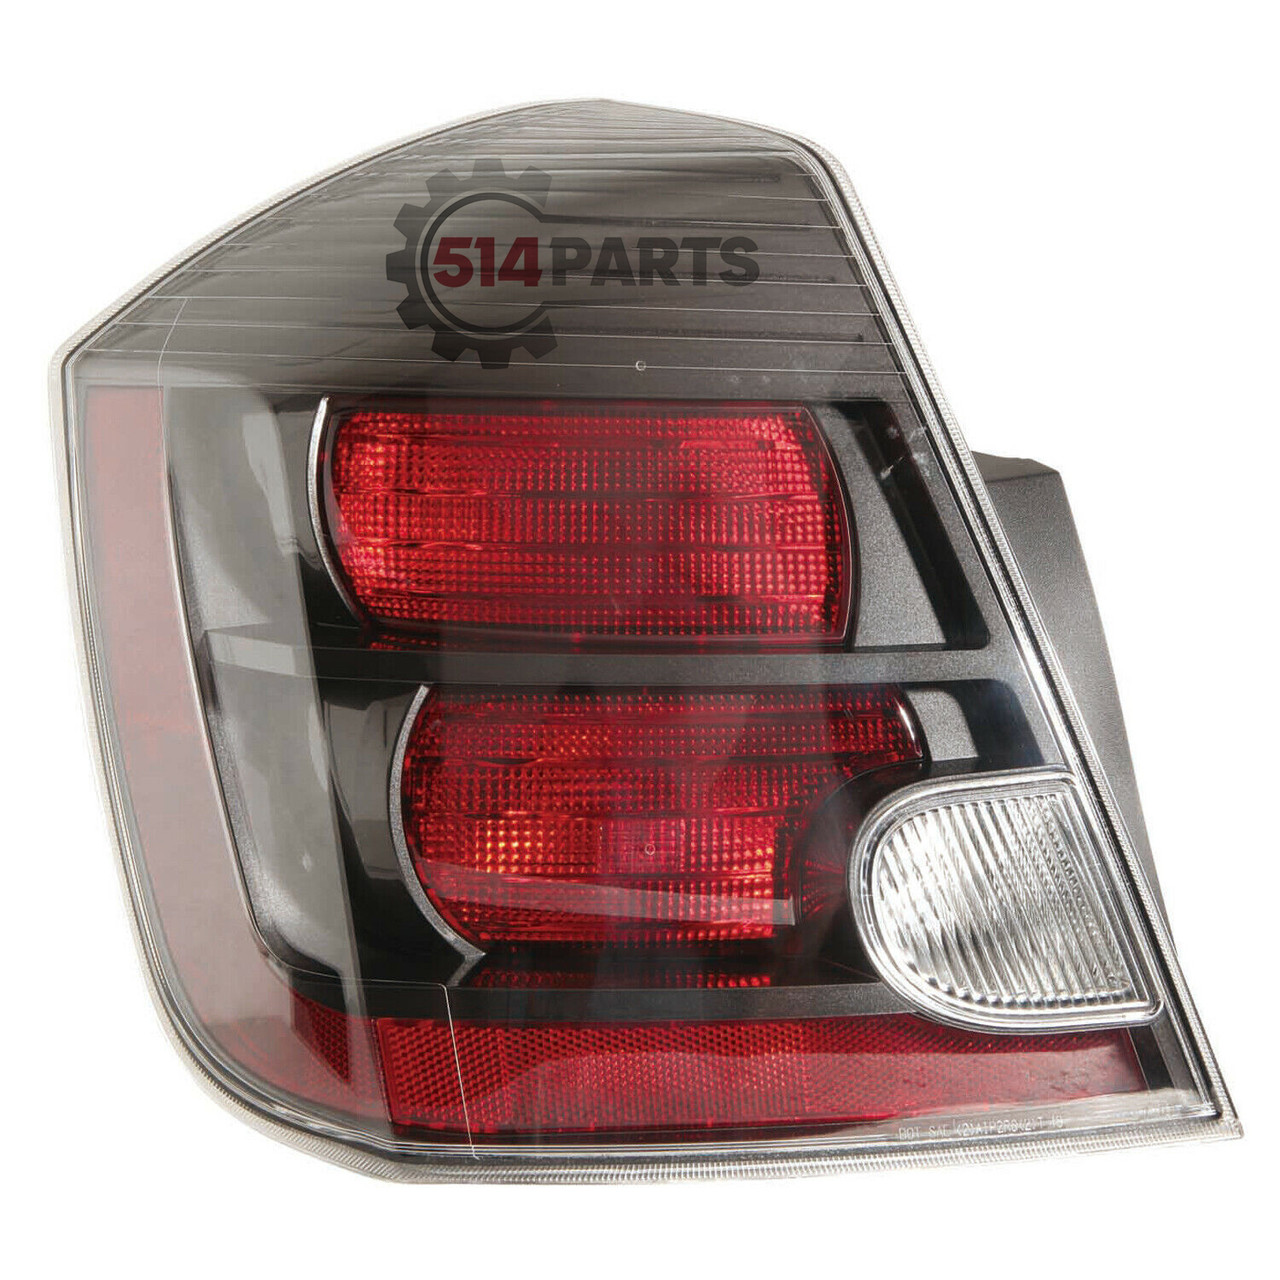 2010 - 2012 NISSAN SENTRA 2.5L TAIL LIGHTS High Quality - PHARES ARRIERE Haute Qualite